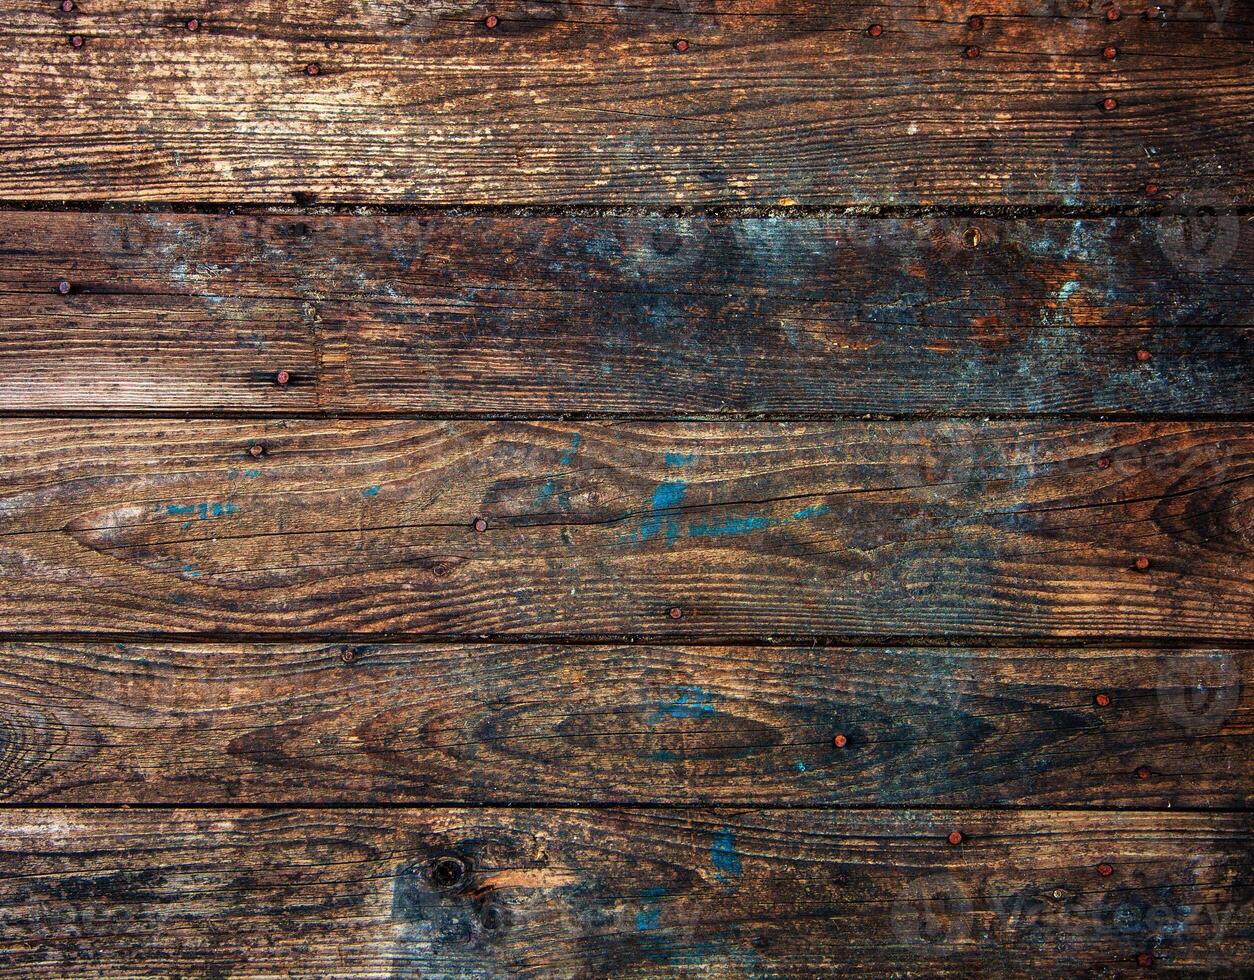 Wood background or texture photo